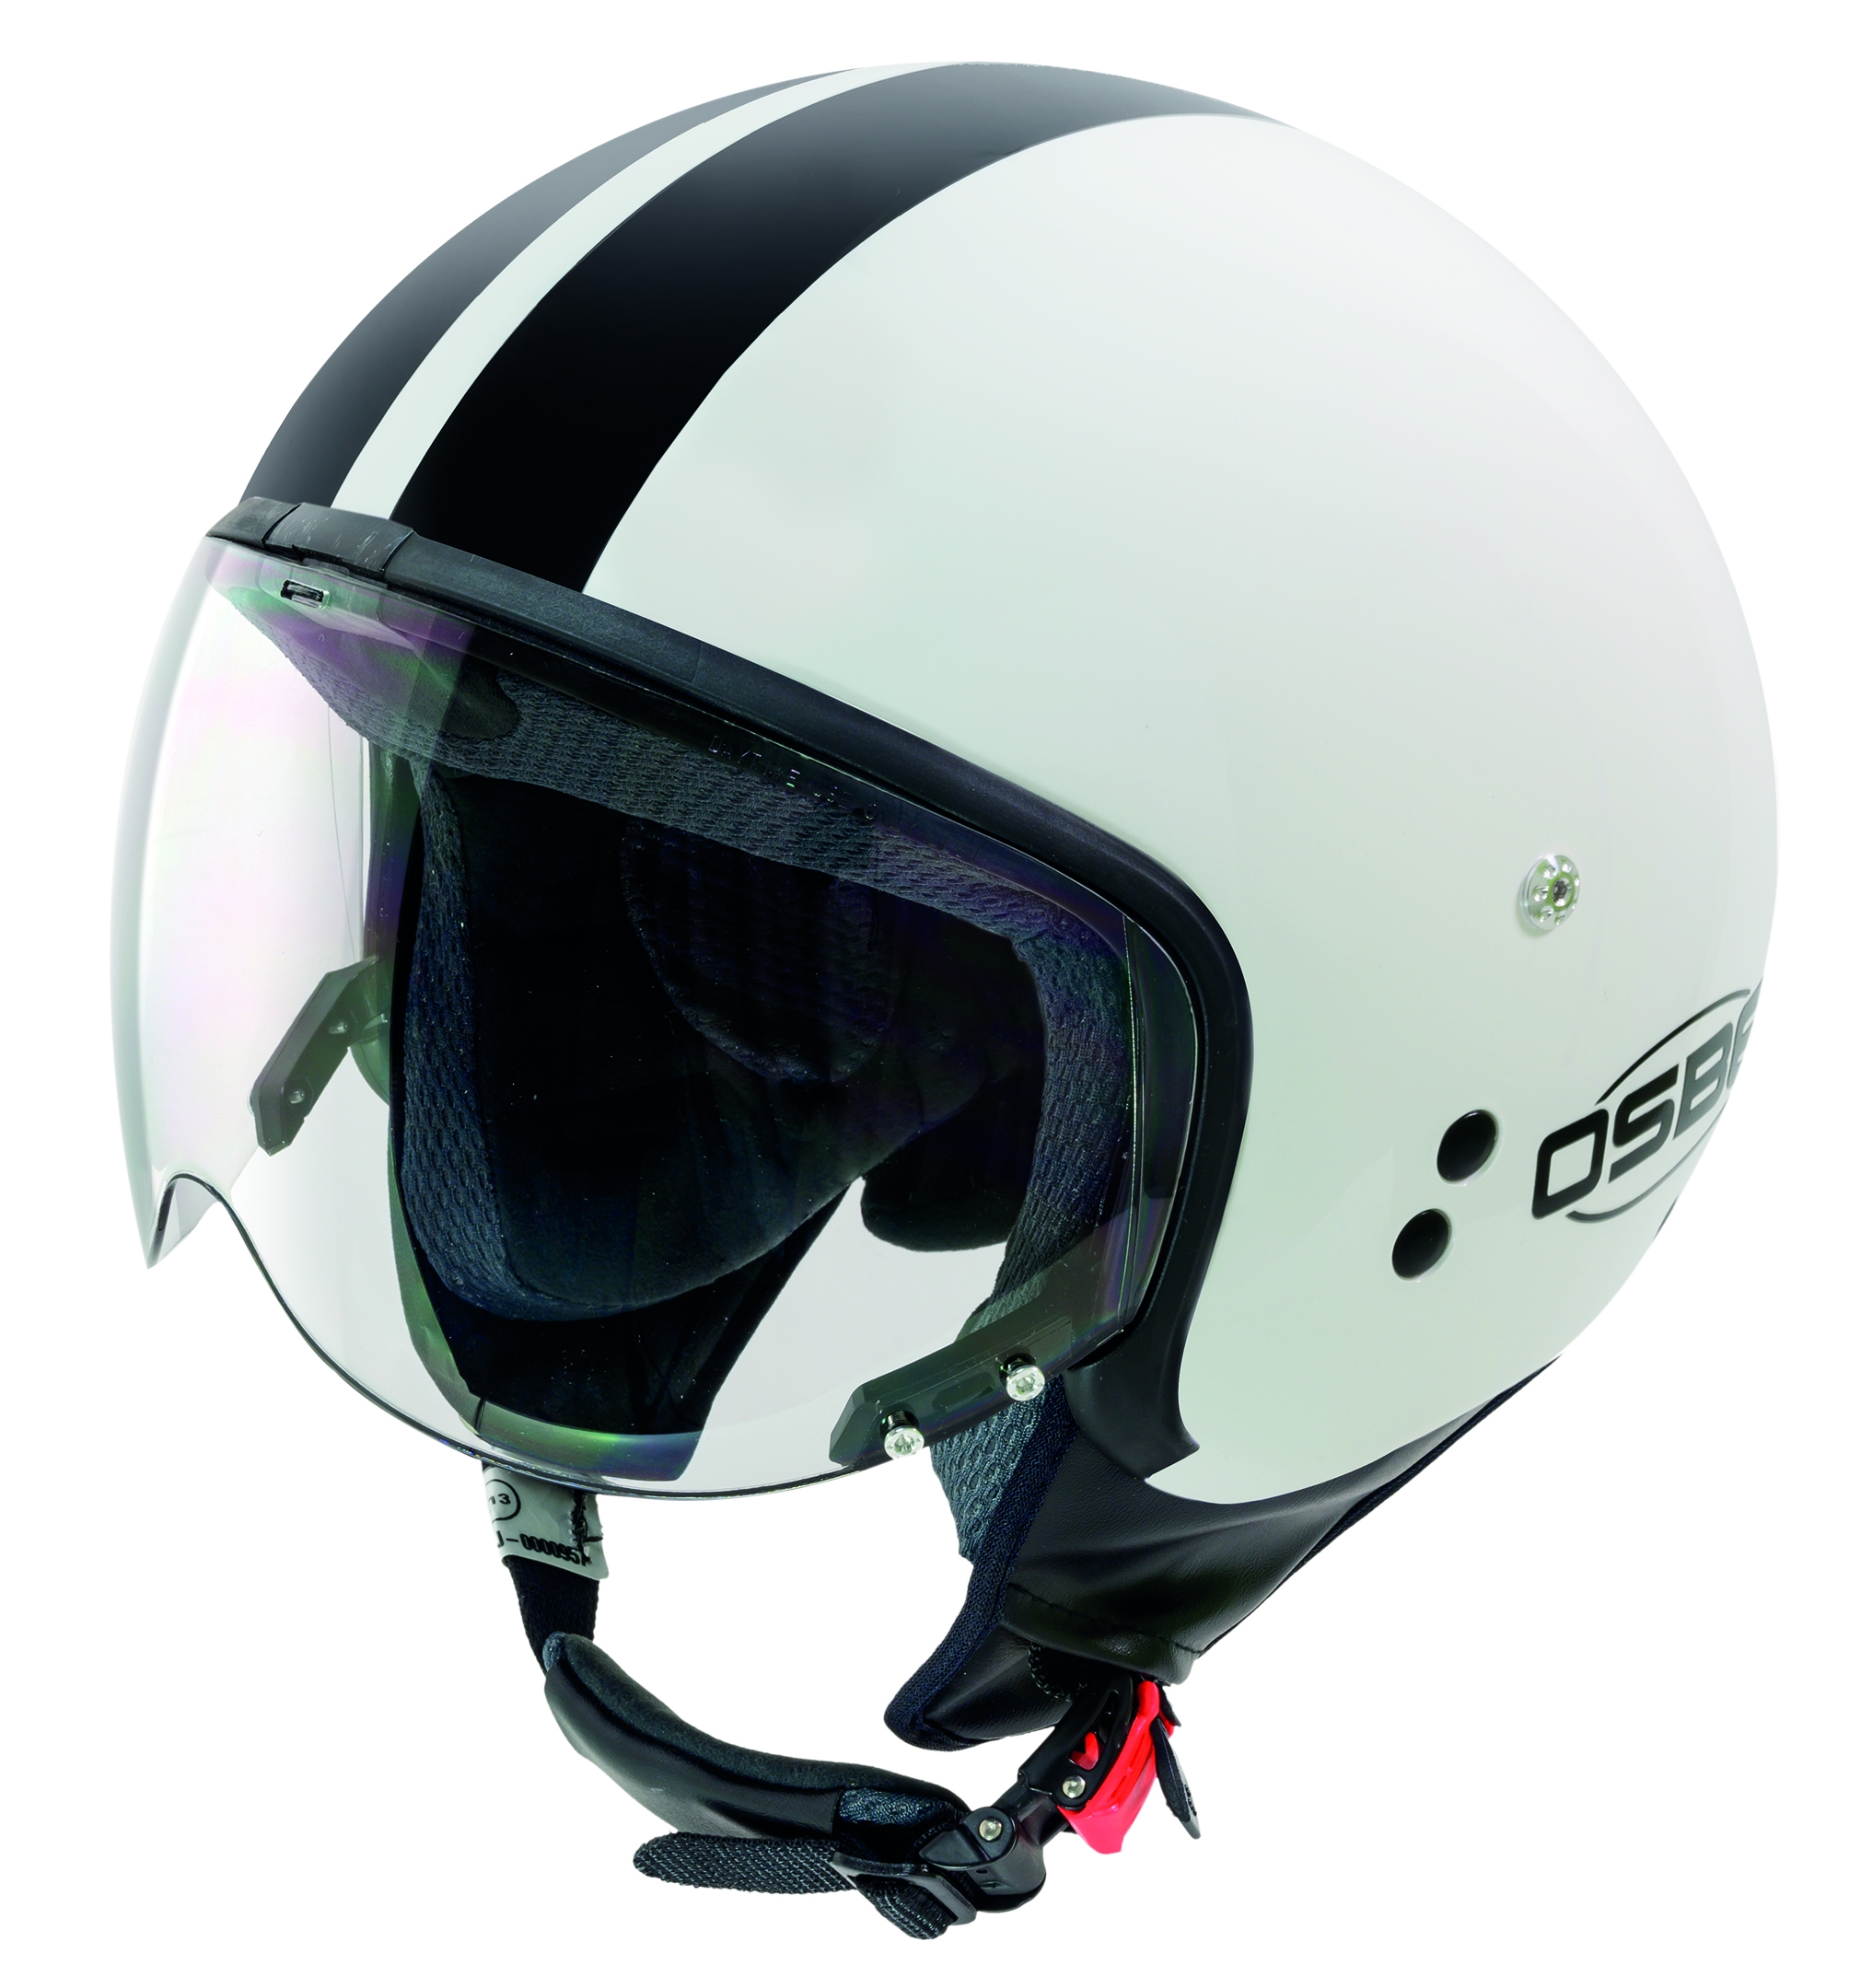 Italy - Bellagio White - Motorcycle Helmet - Quality - Made in Italy - Avvenice